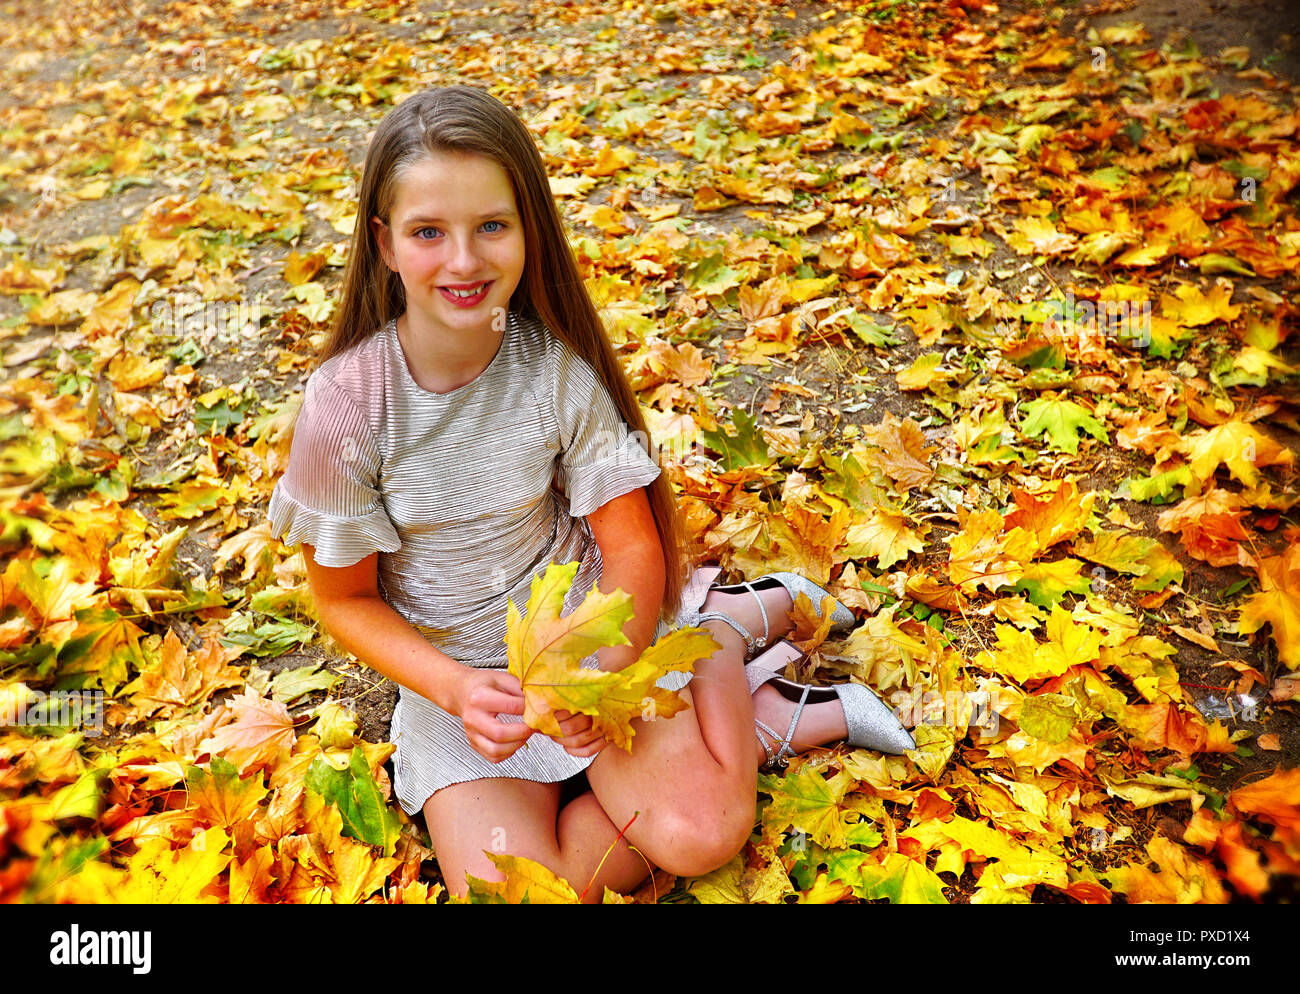 Autumn fashion dress child girl sitting fall leaves park outdoor. Stock Photo